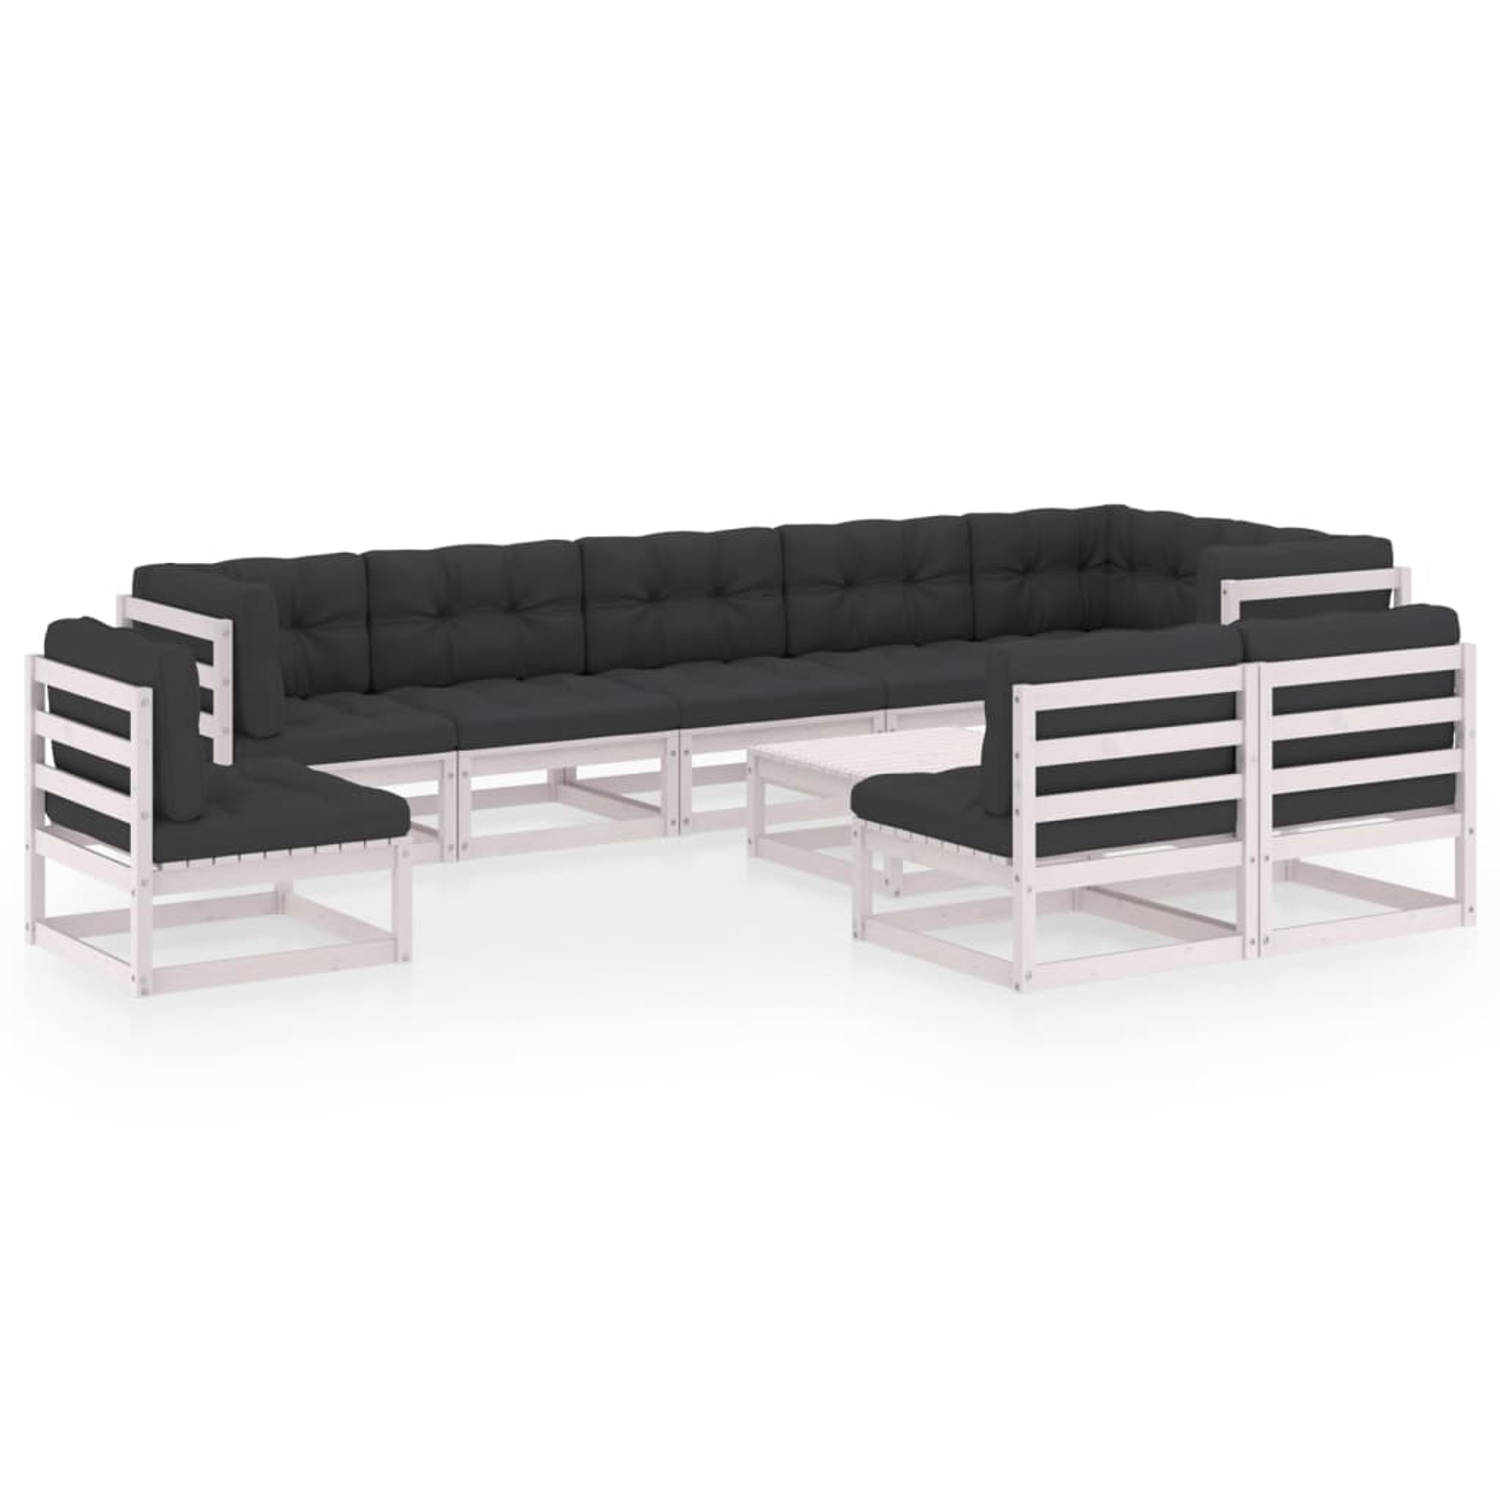 The Living Store Tuinset Grenenhout - Lounge - 70 x 70 x 67 cm - wit - antraciet